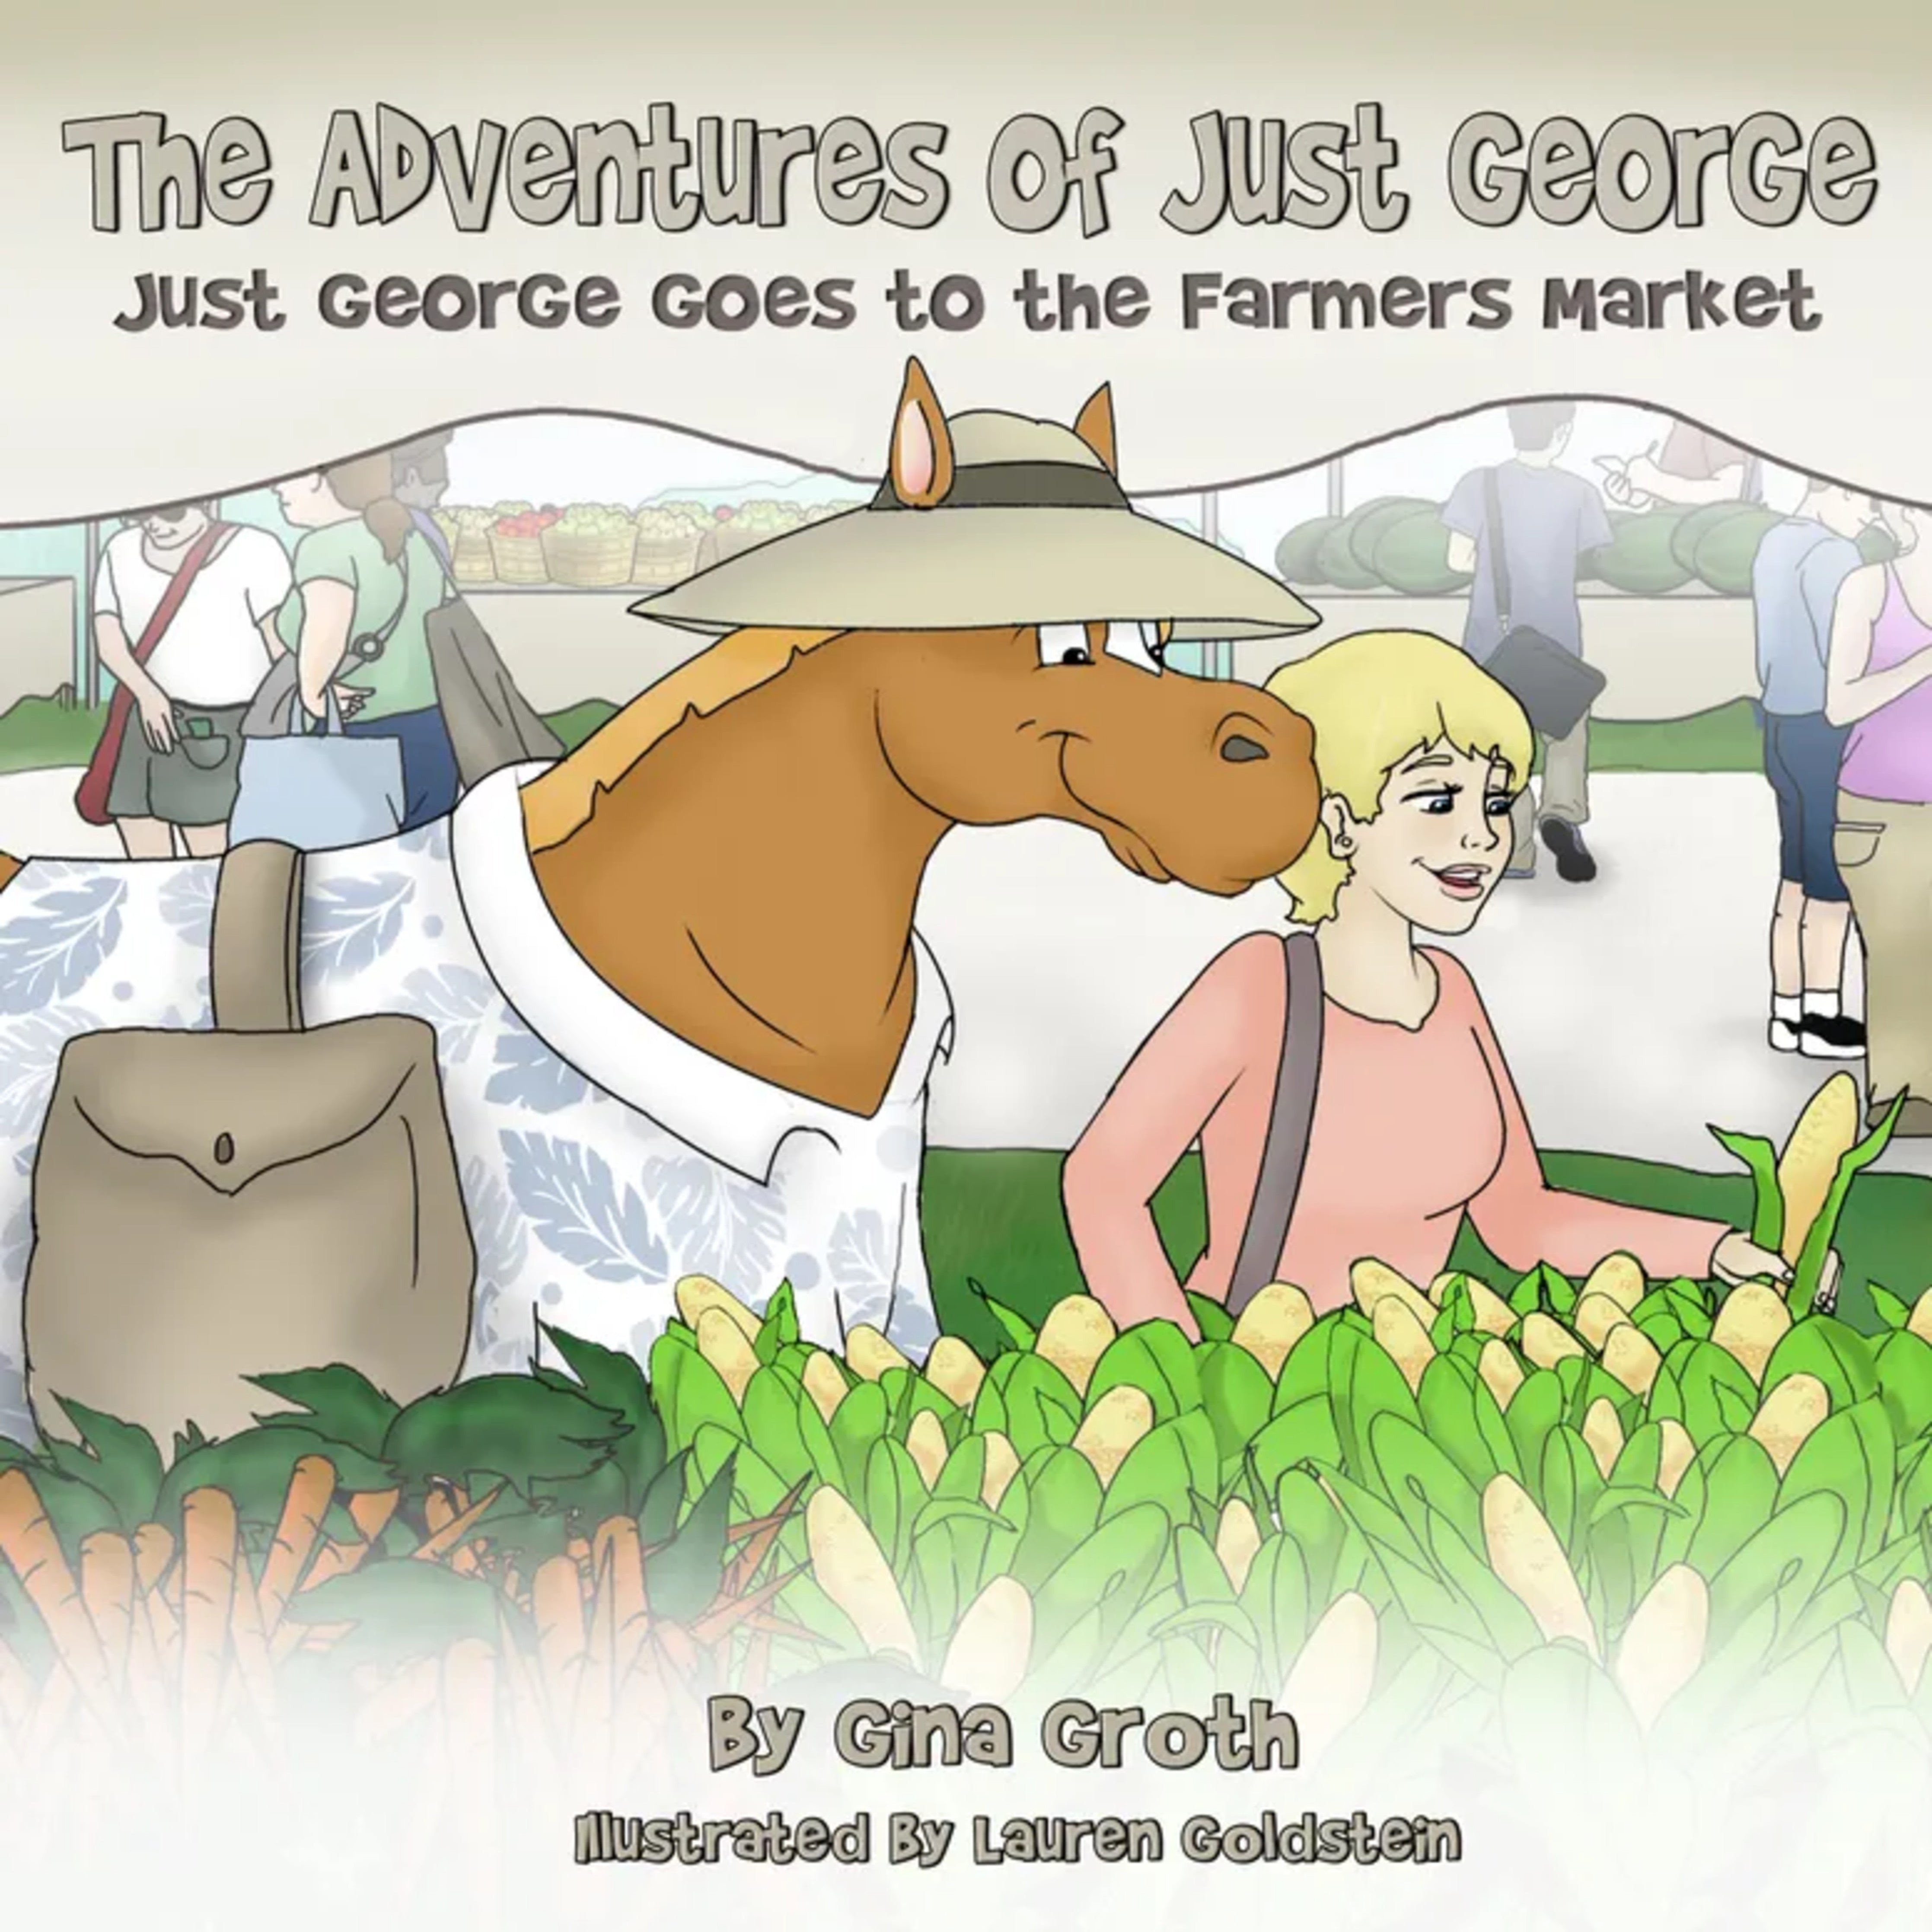 Just George Goes to the Farmers Market Storybook